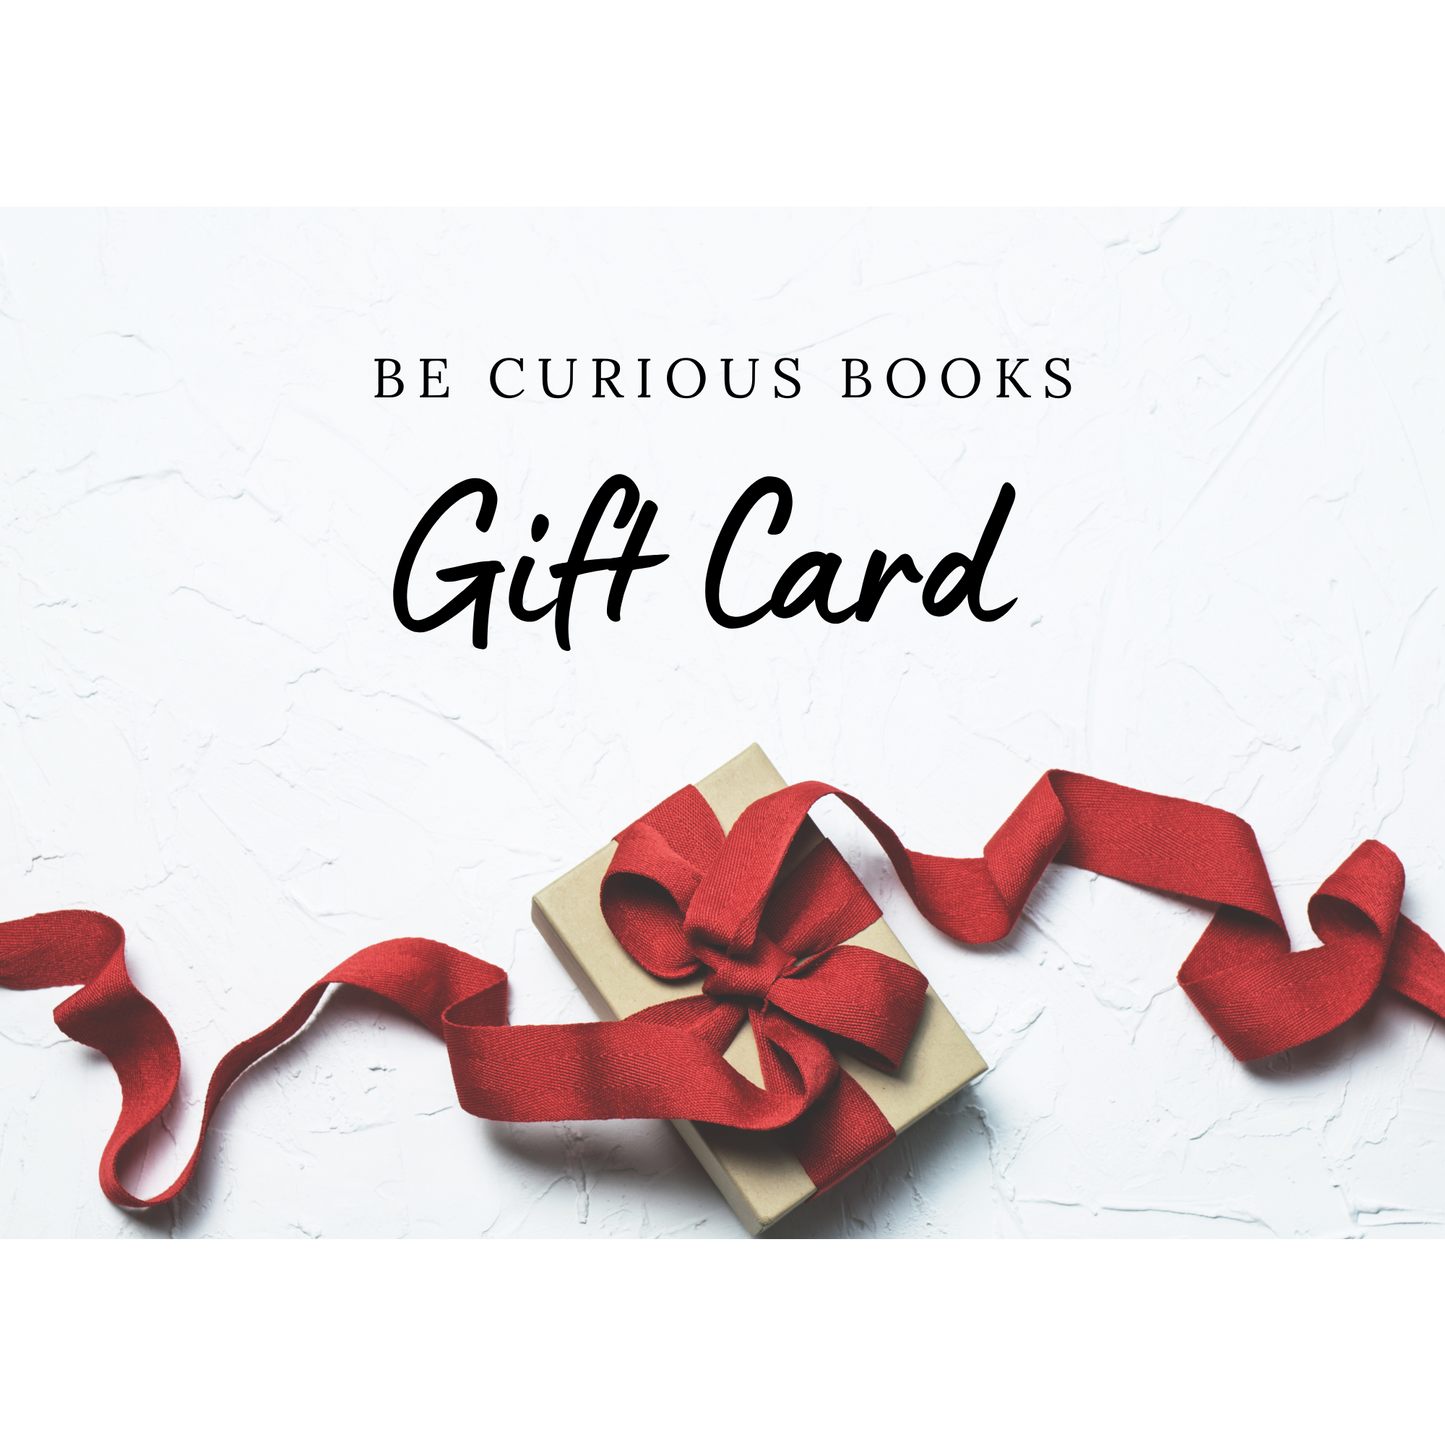 Be Curious Books Digital Gift Card